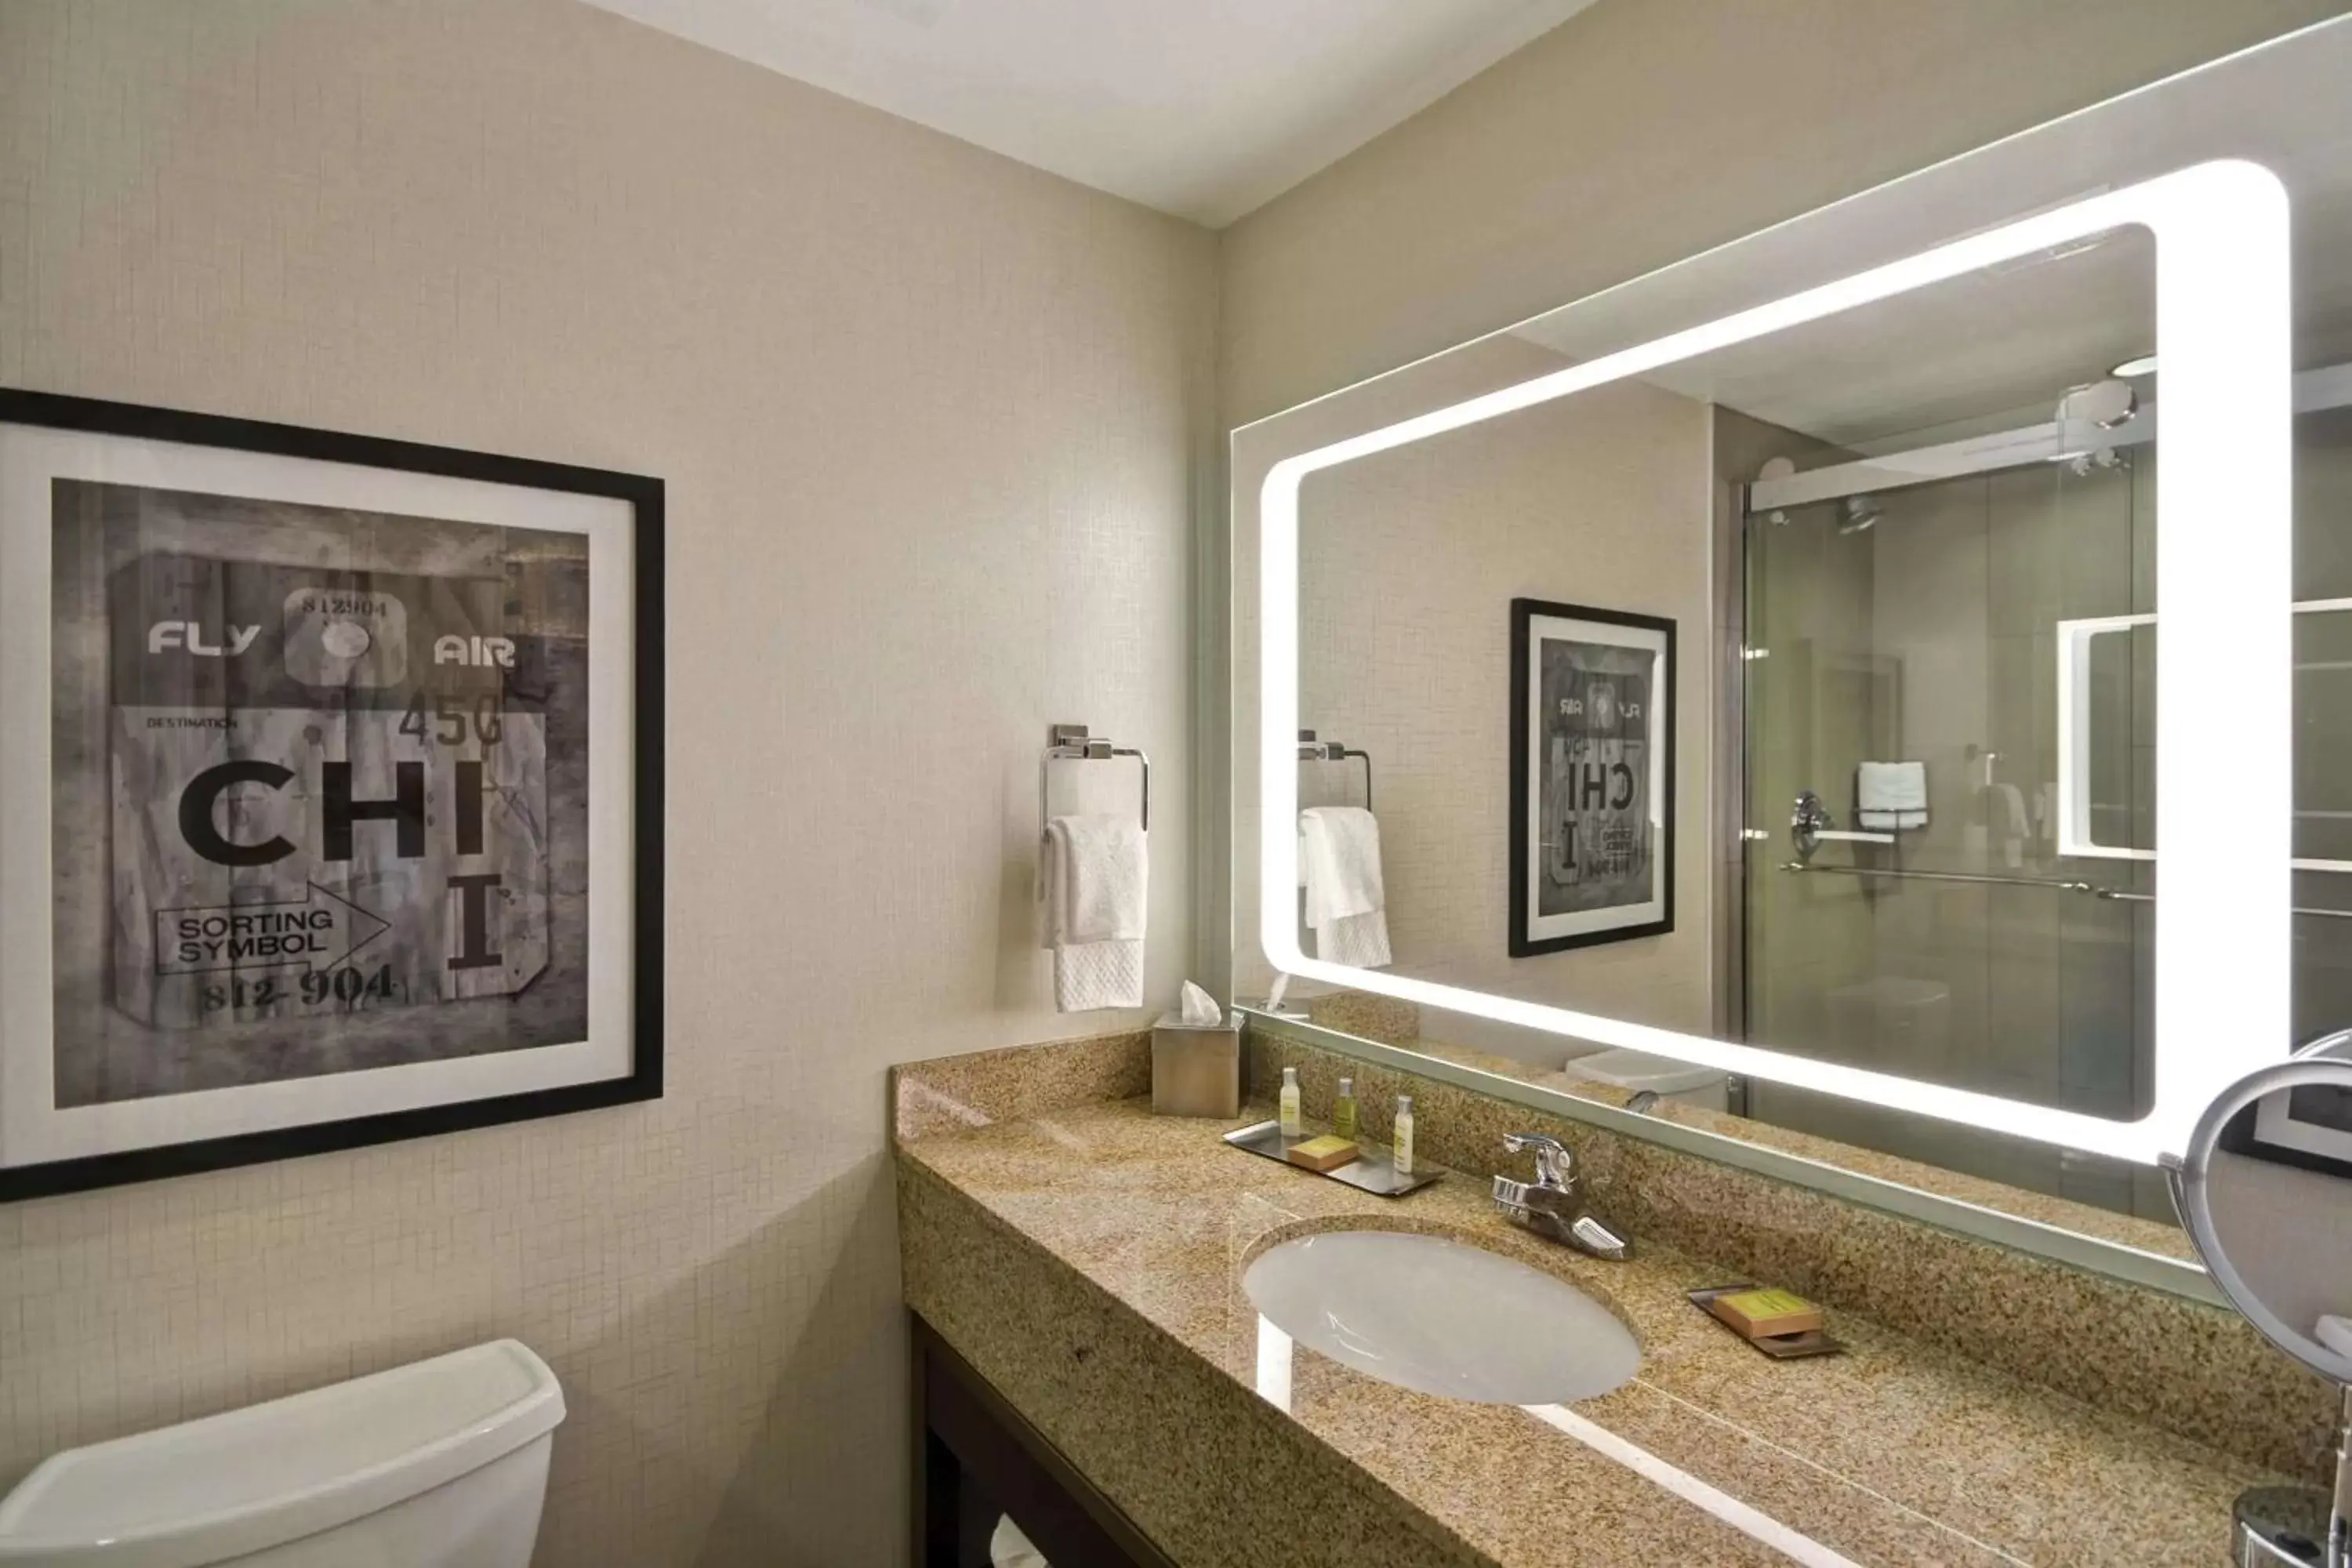 Bathroom in DoubleTree by Hilton Chicago Midway Airport, IL